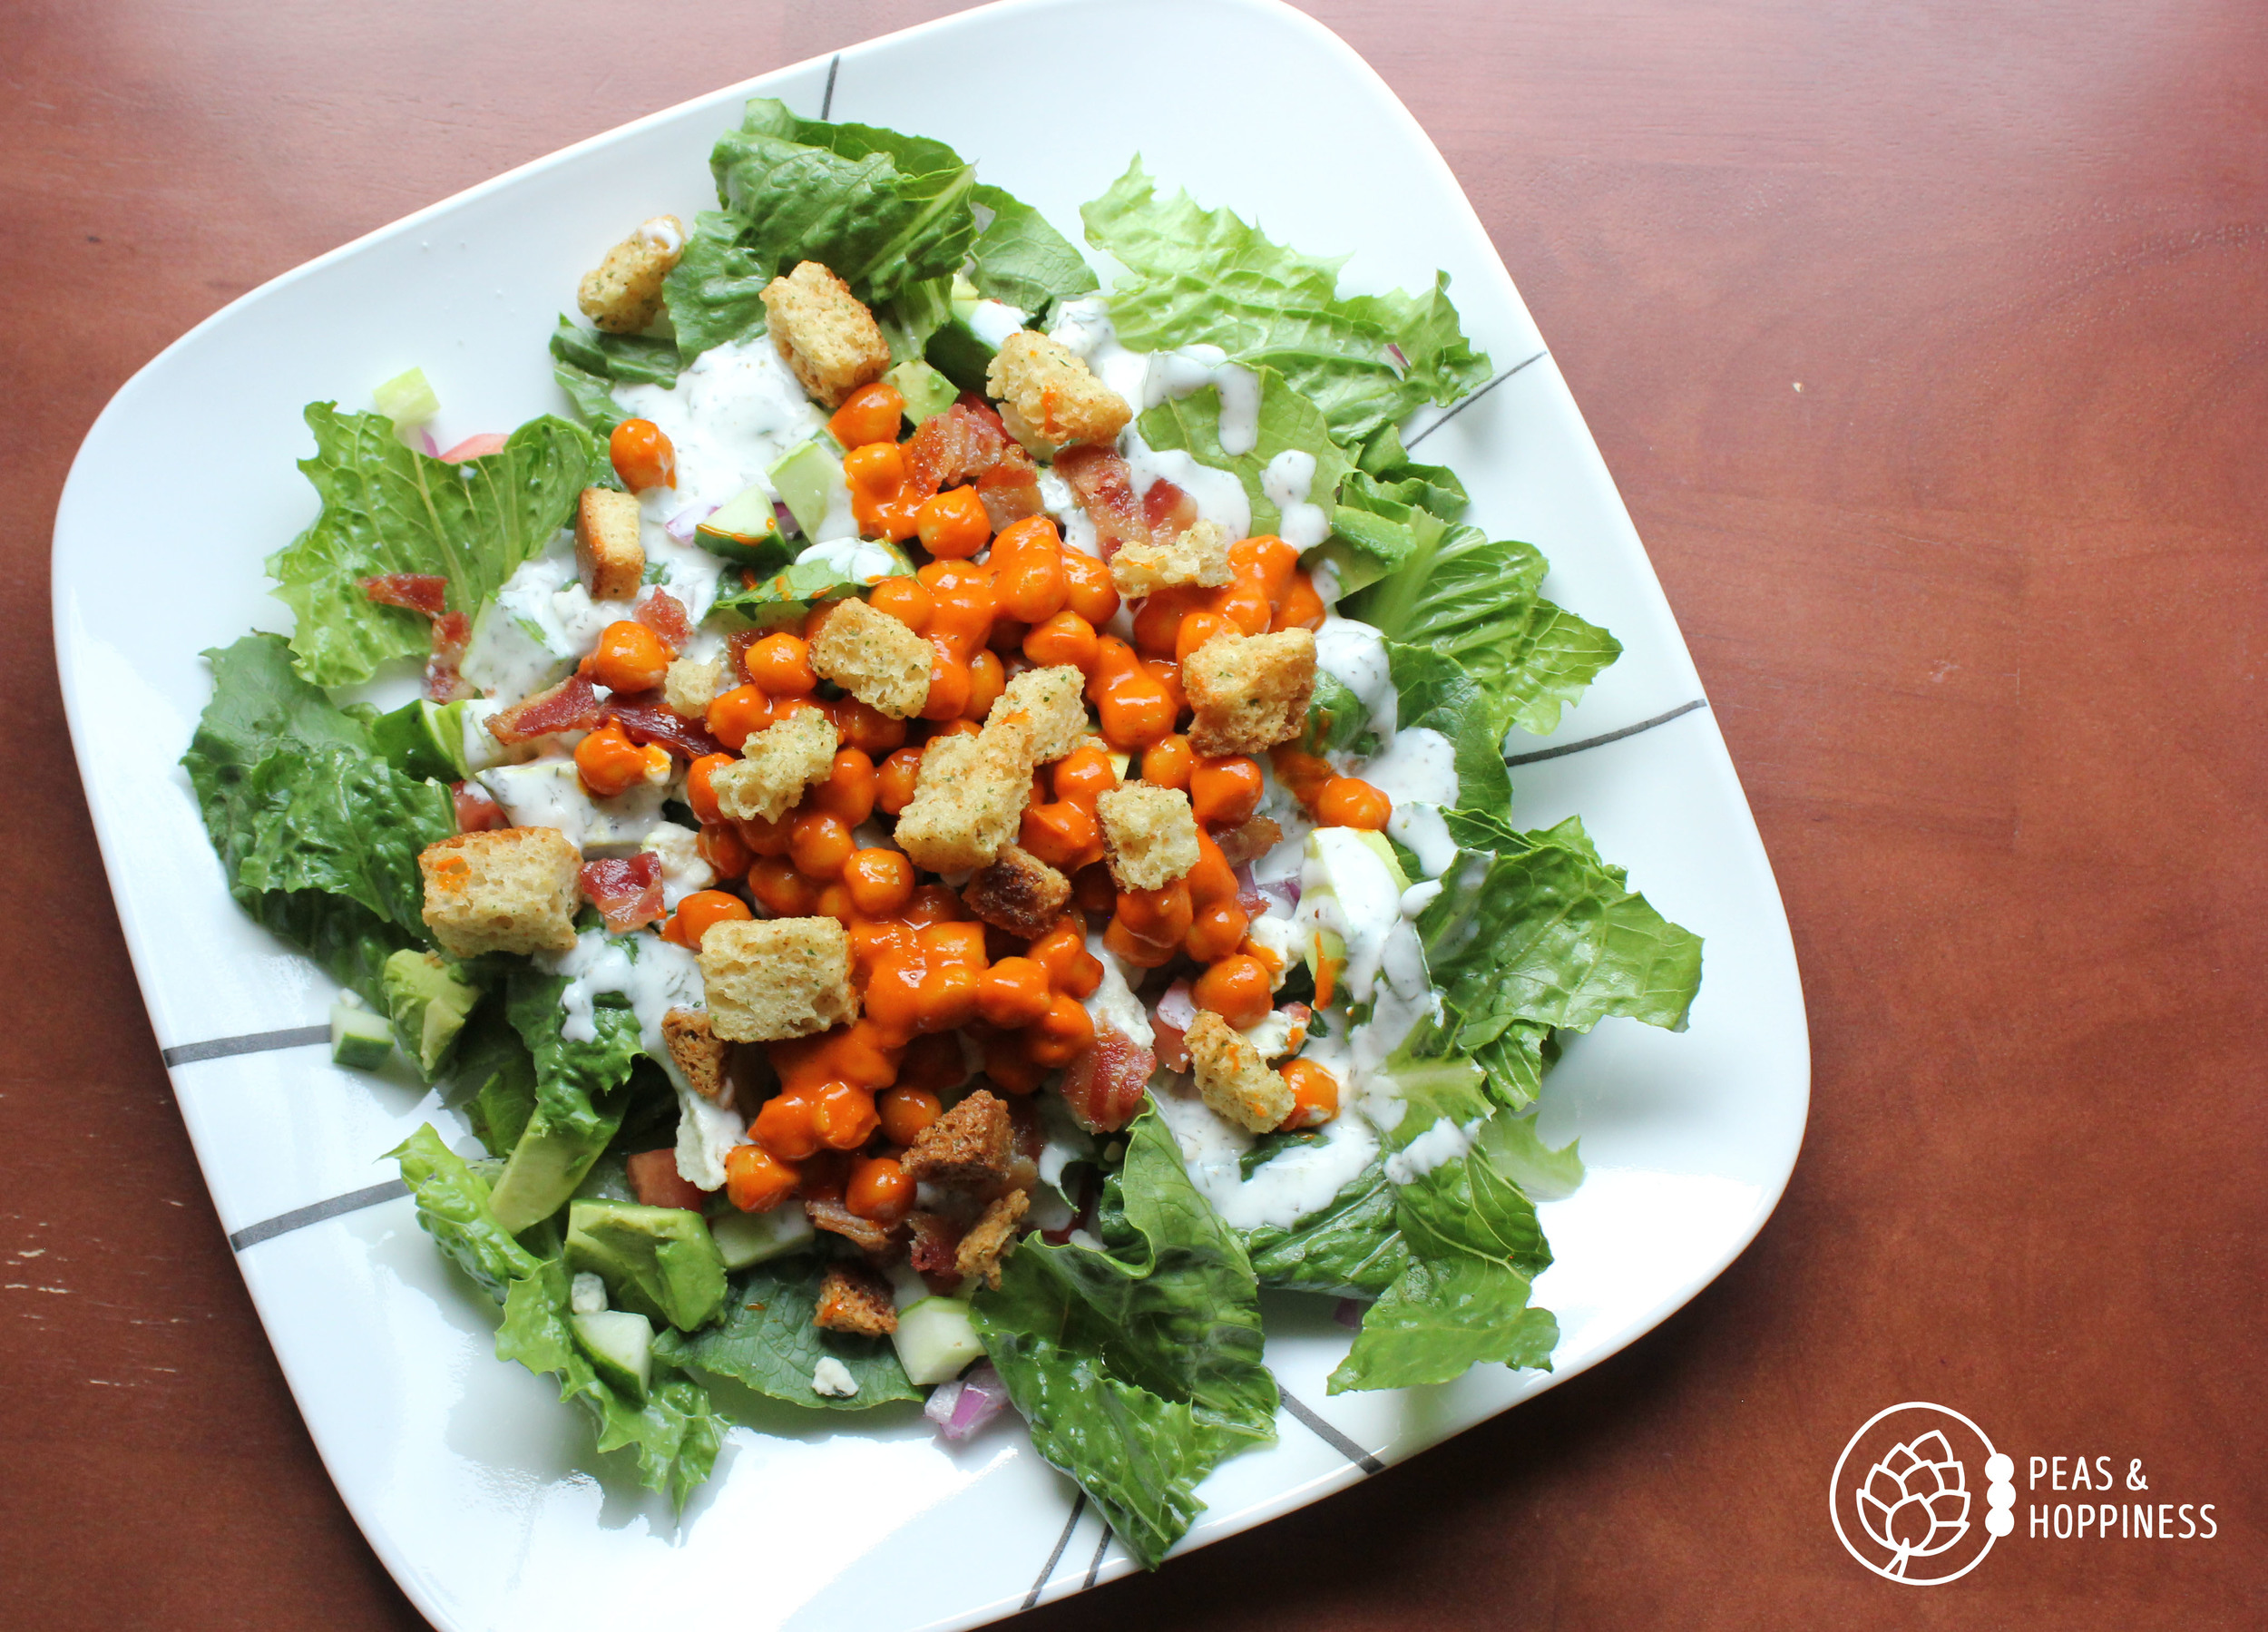 Buffalo Chickpea Salad from Peas and Hoppiness - www.peasandhoppiness.com